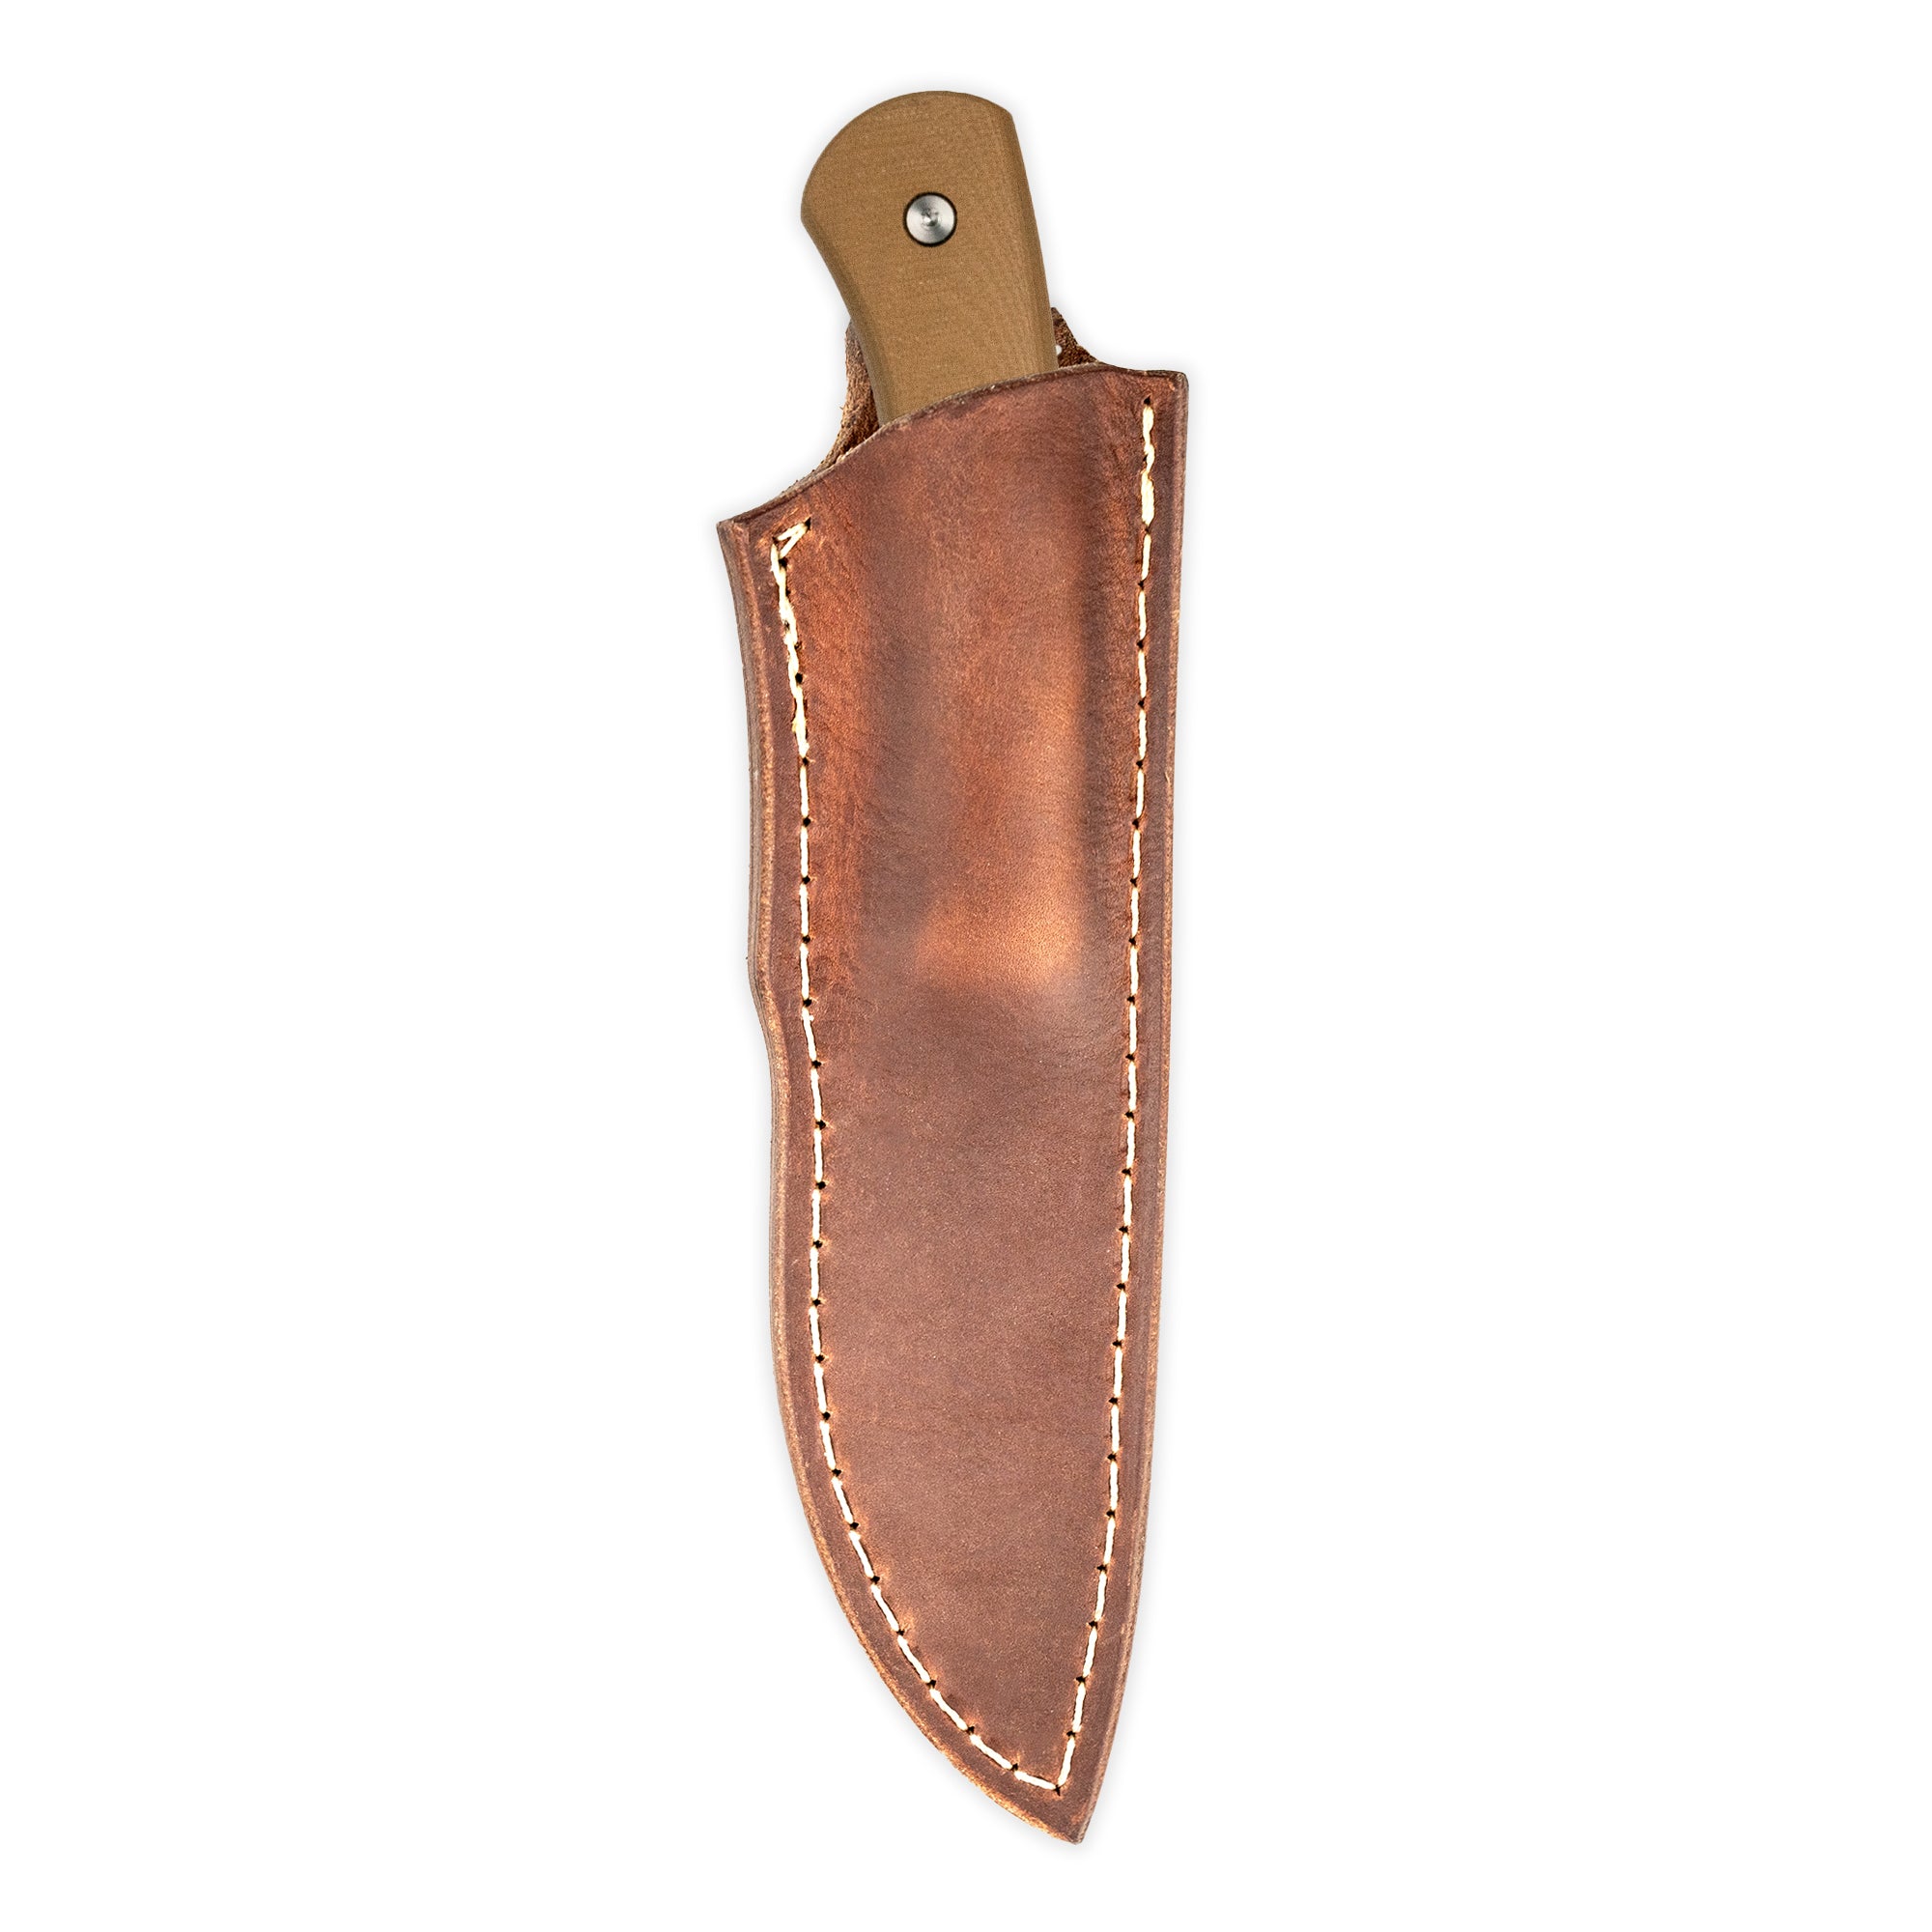 MKC WHITETAIL - VERTICAL LEATHER SHEATH